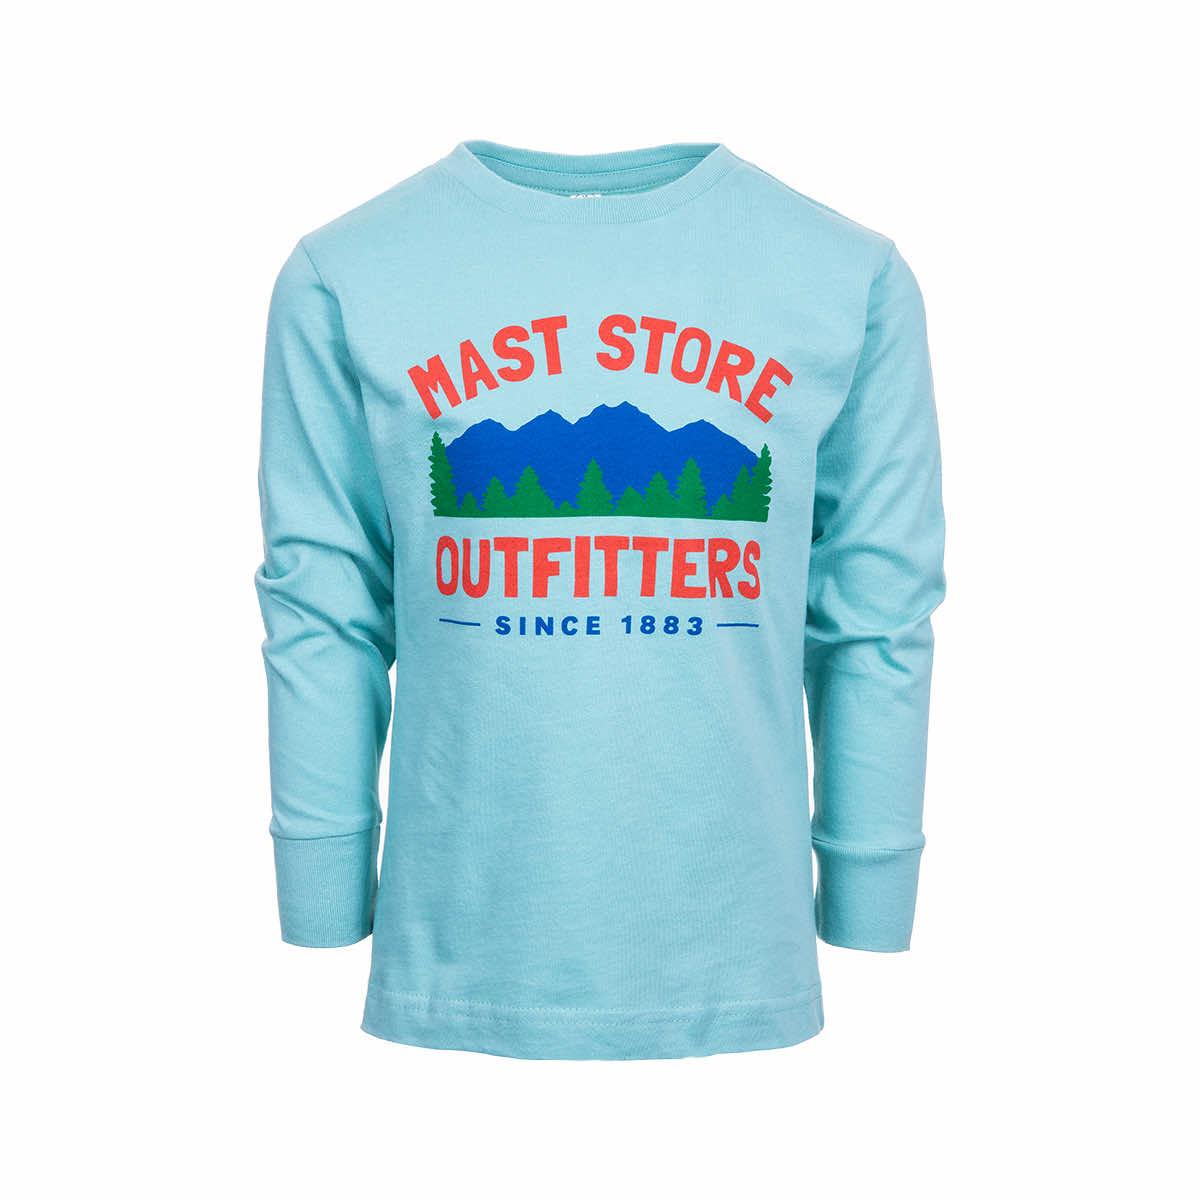 Kids' Mast Store Outfitters Long Sleeve T-Shirt